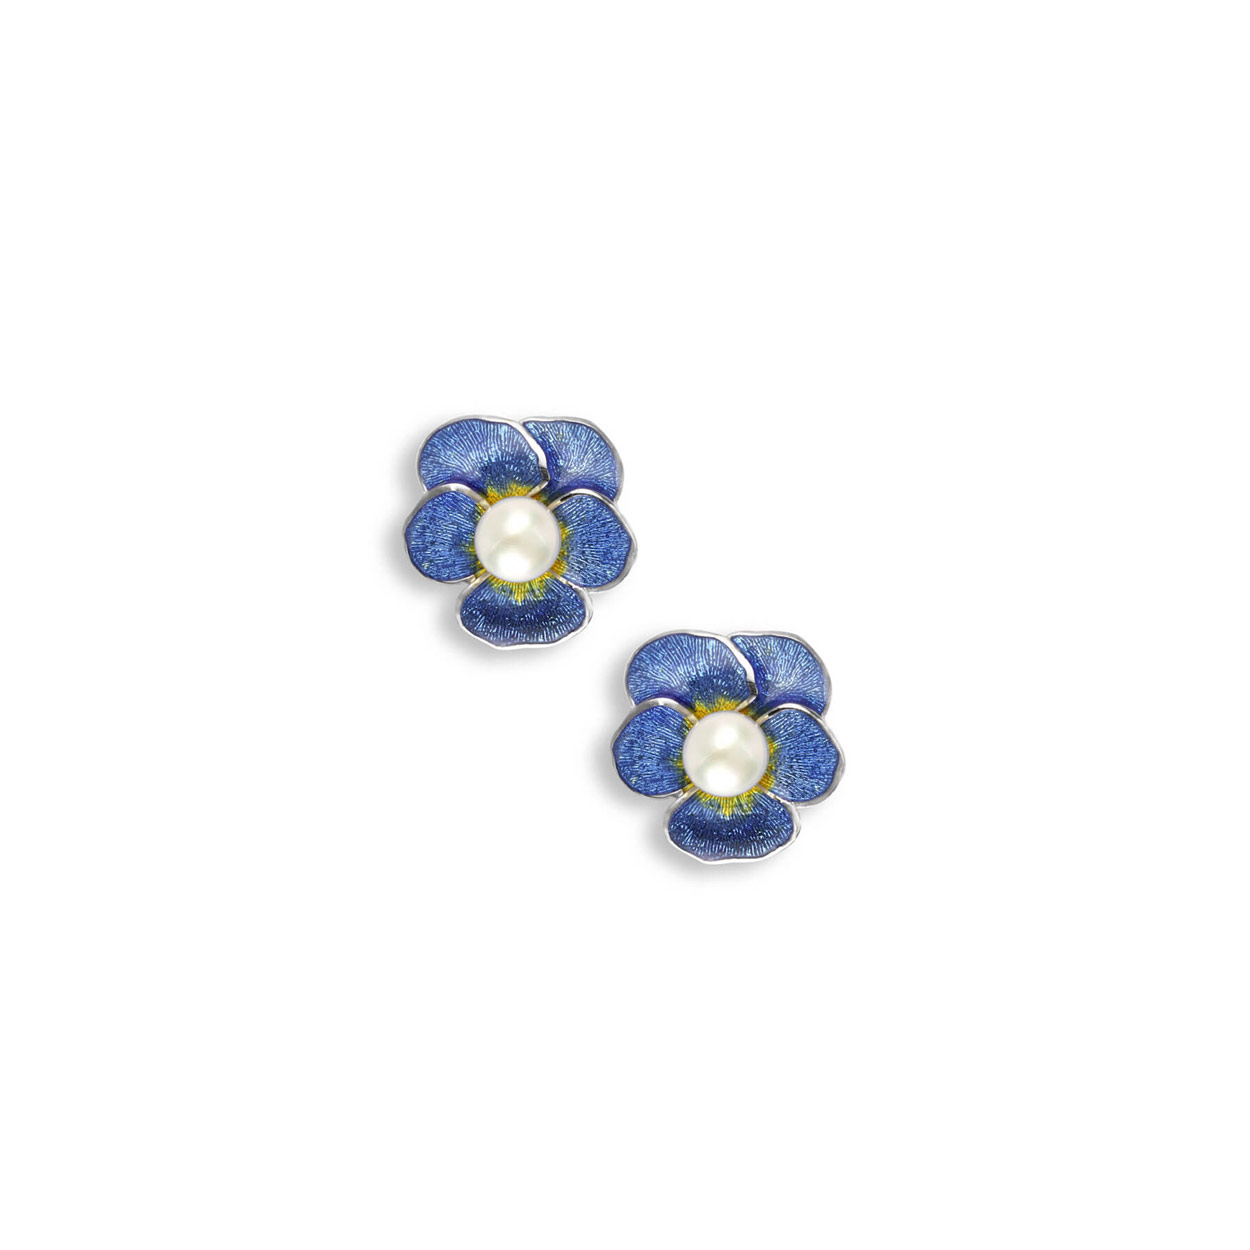 Nicole Barr - Sterling Silver Blue Pansy Stud Earrings with Freshwater ...